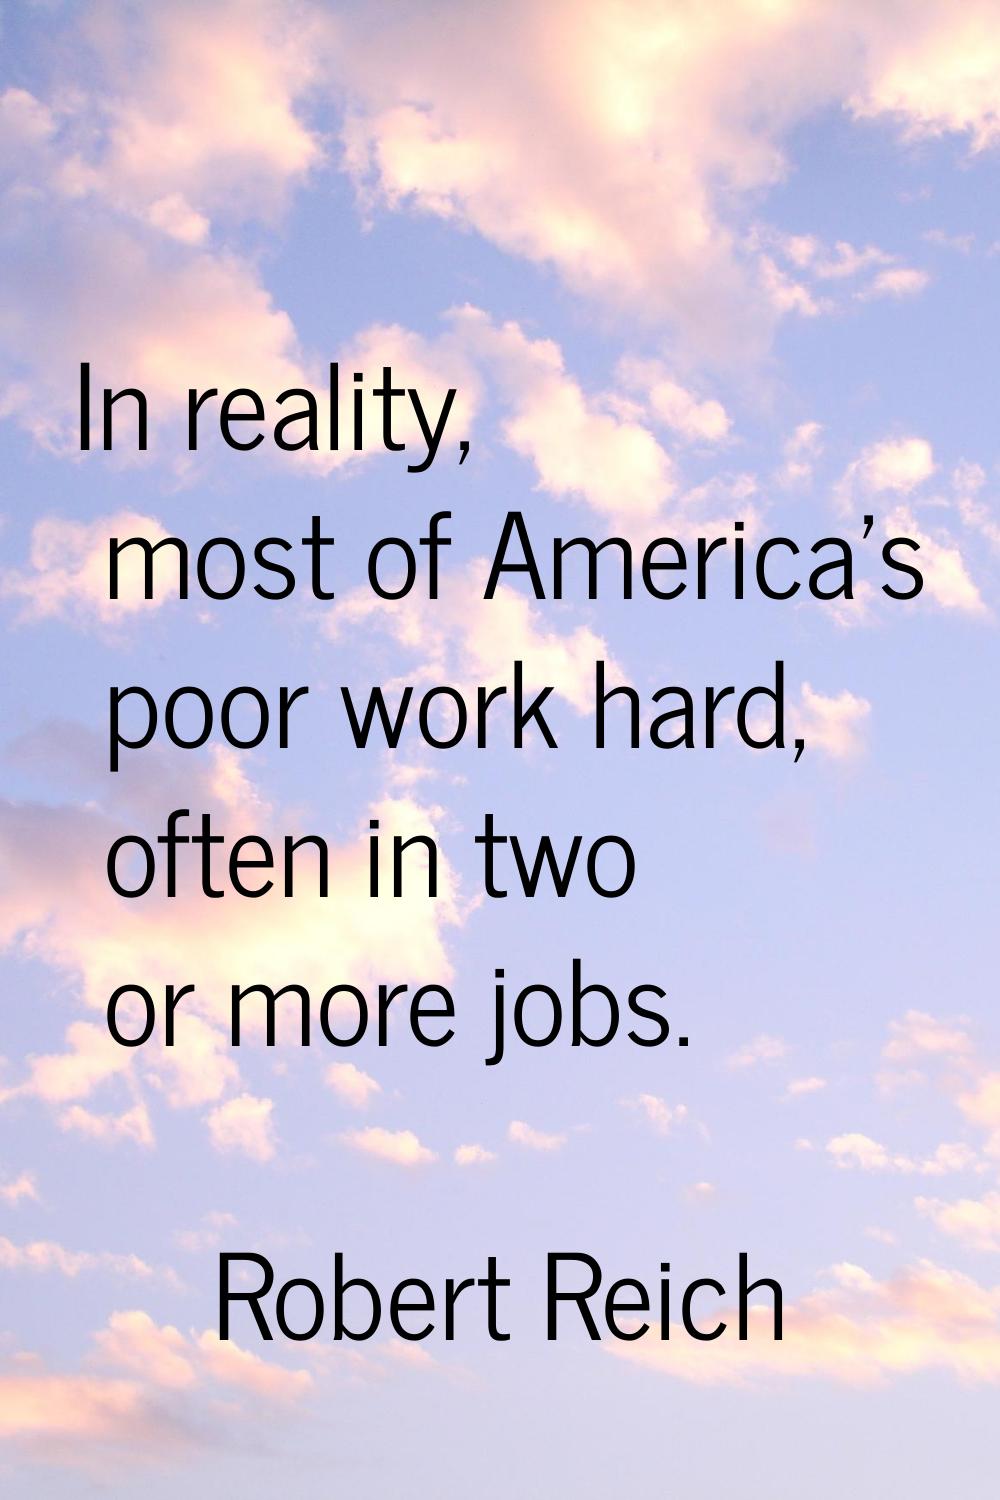 In reality, most of America's poor work hard, often in two or more jobs.